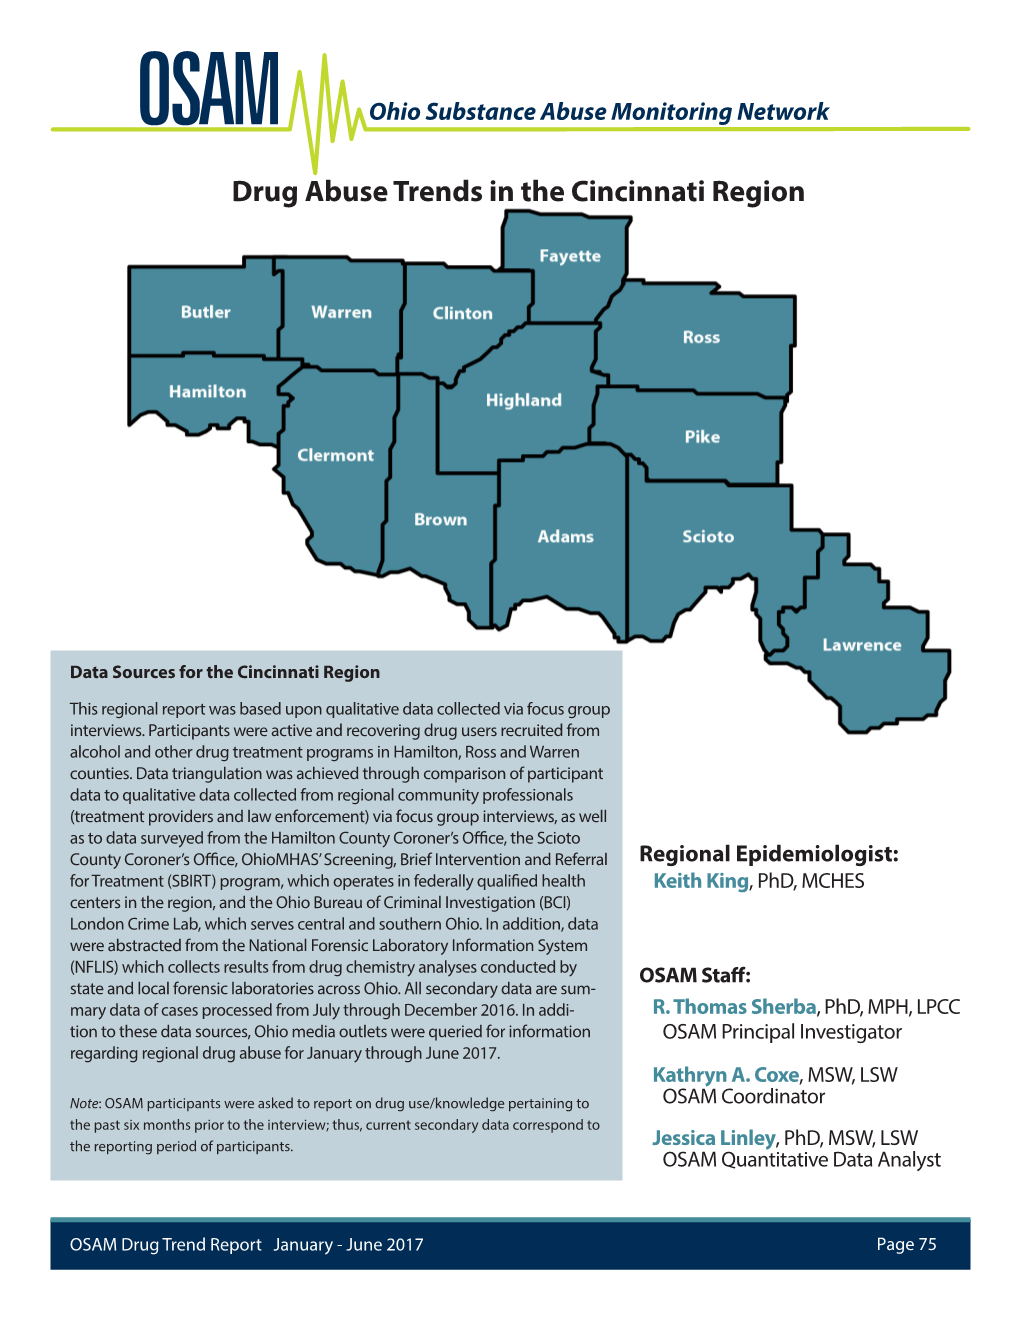 Drug Abuse Trends in the Cincinnati Region OSAM Ohio Substance Abuse Monitoring Network